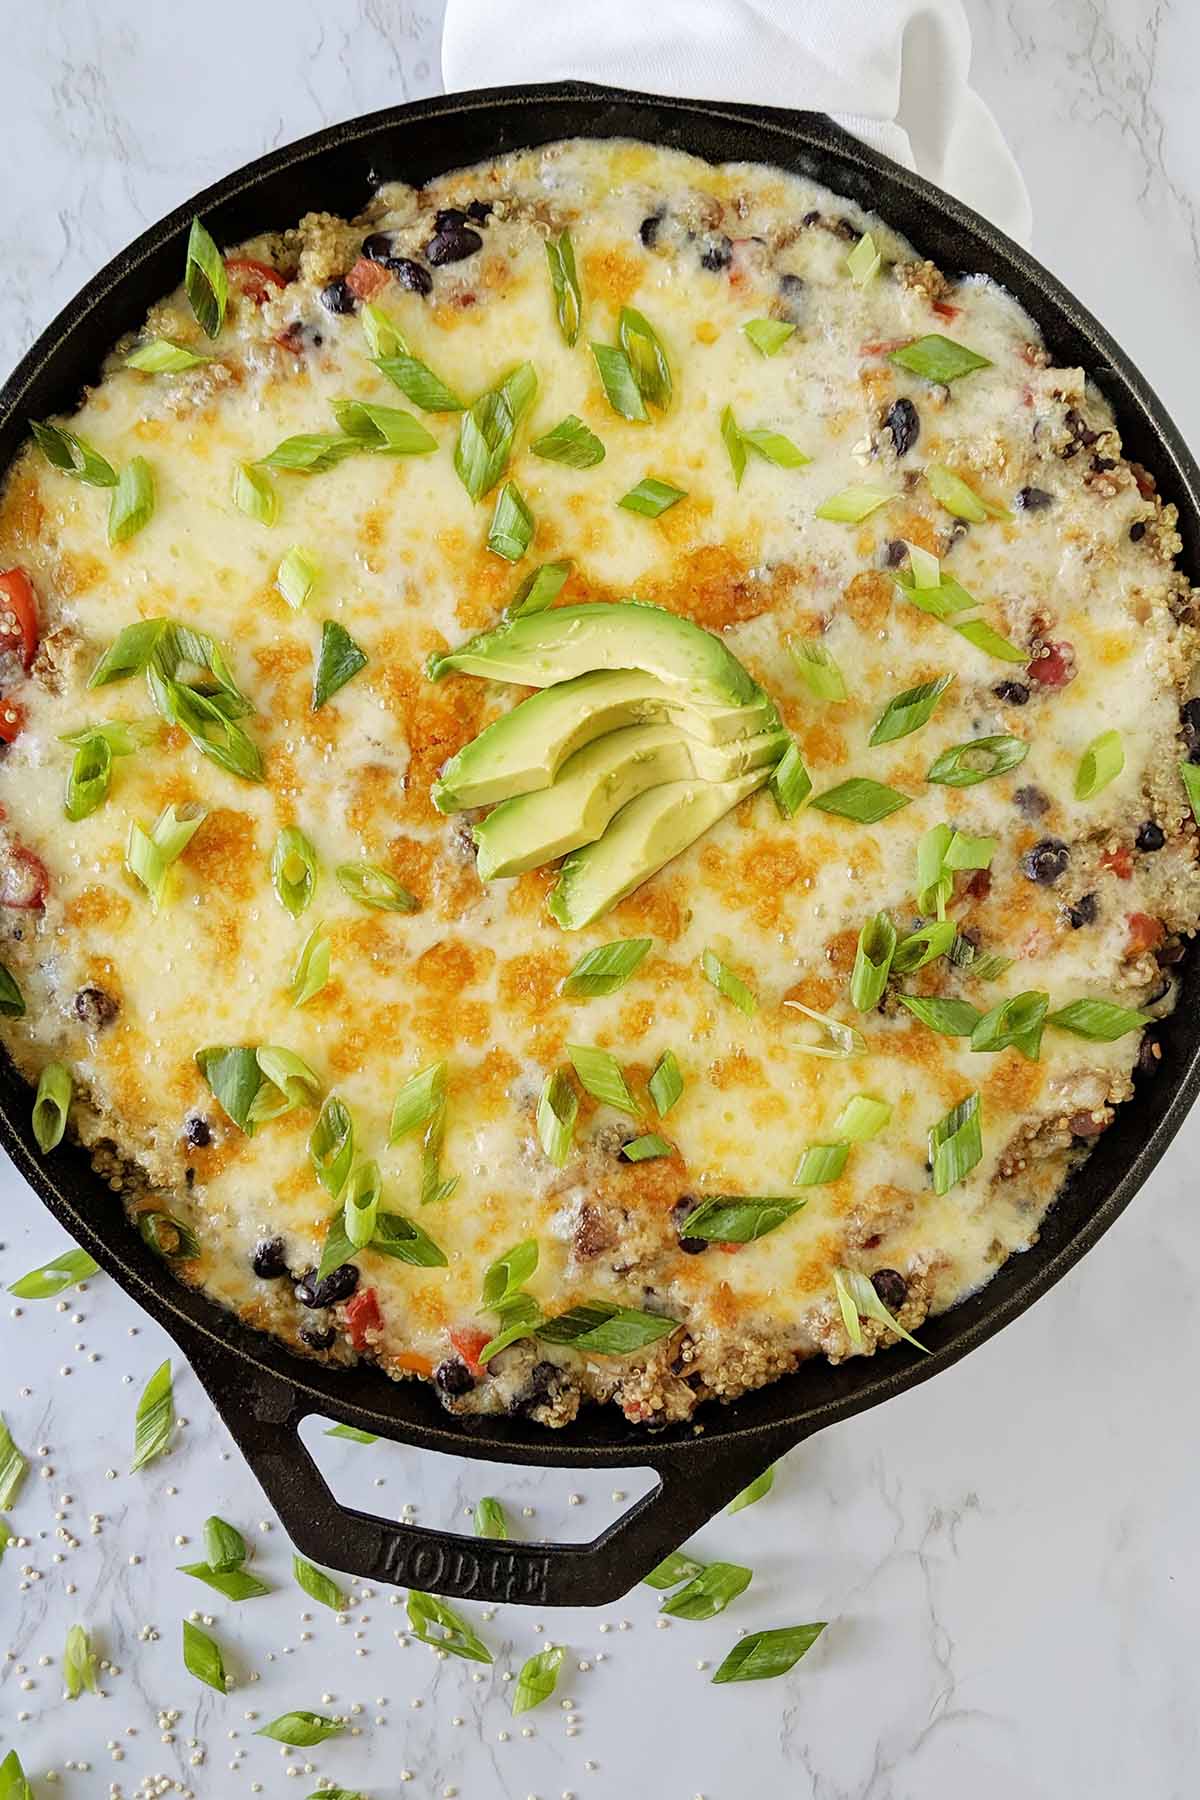 Cheesy Mexican casserole with green onion and avocado garnish